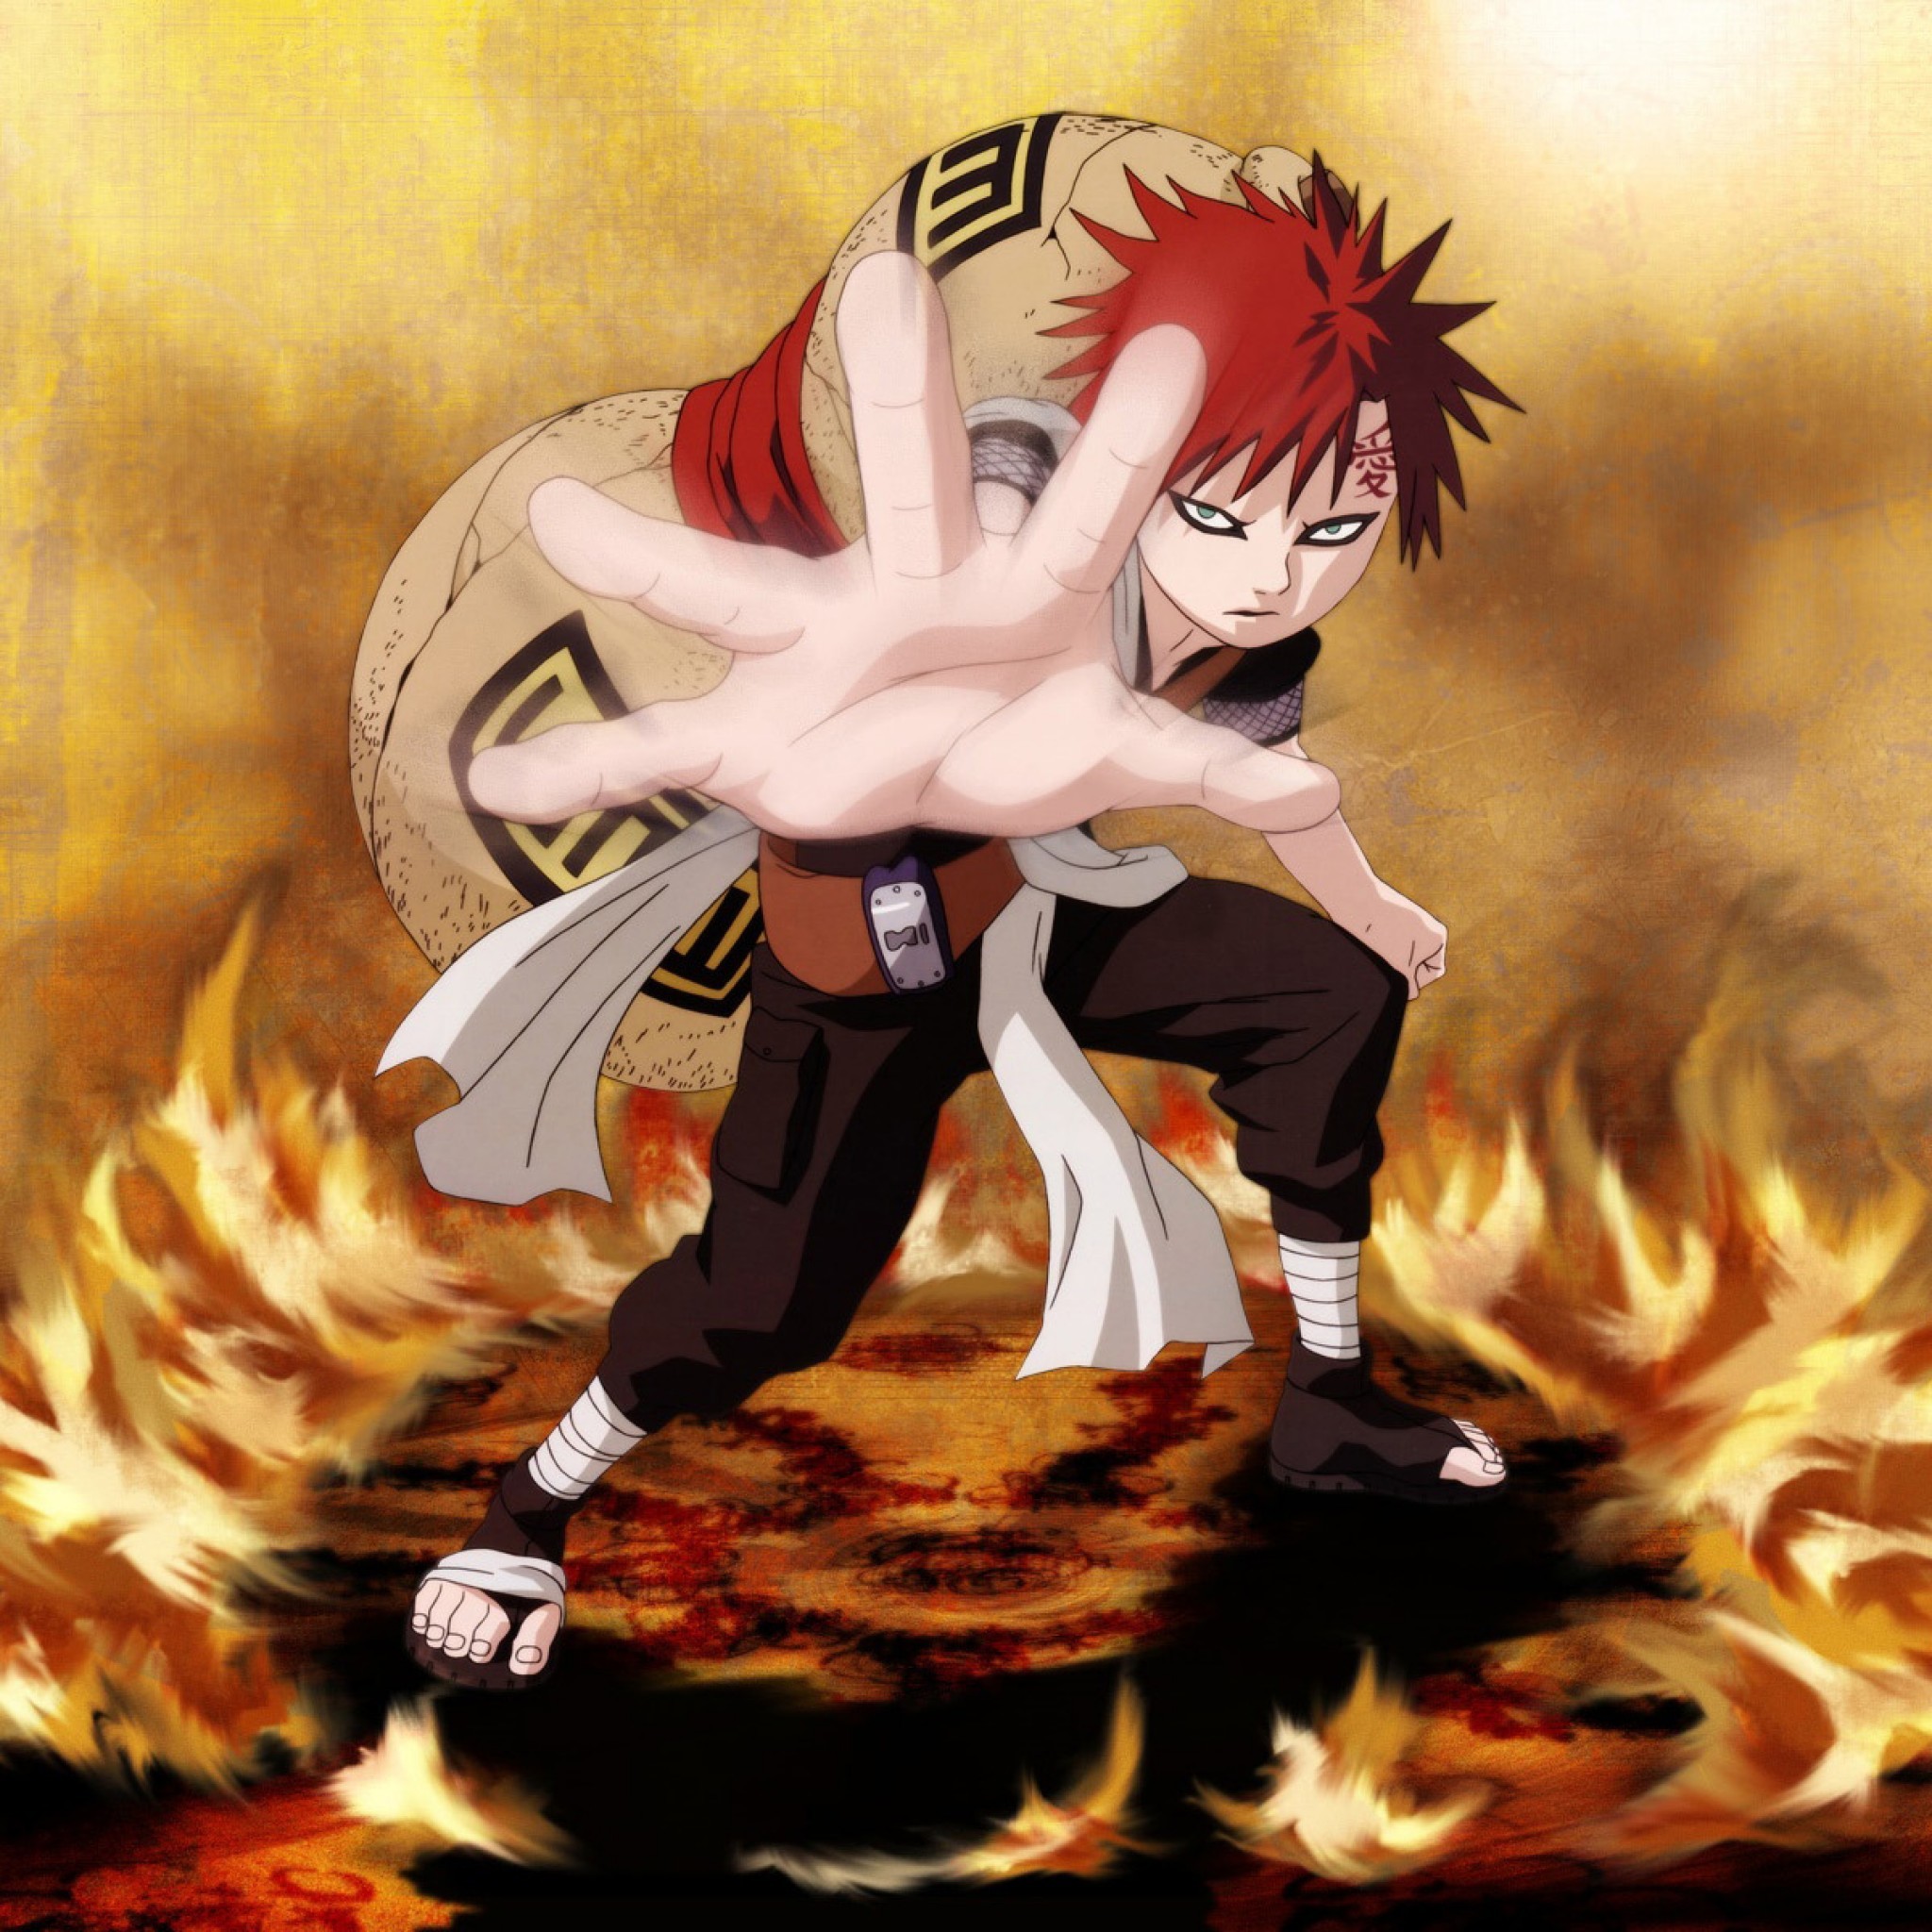 2048x2048 Tap image for more Naruto Shippuden HD wallpapers for iPad, iPhone & Android